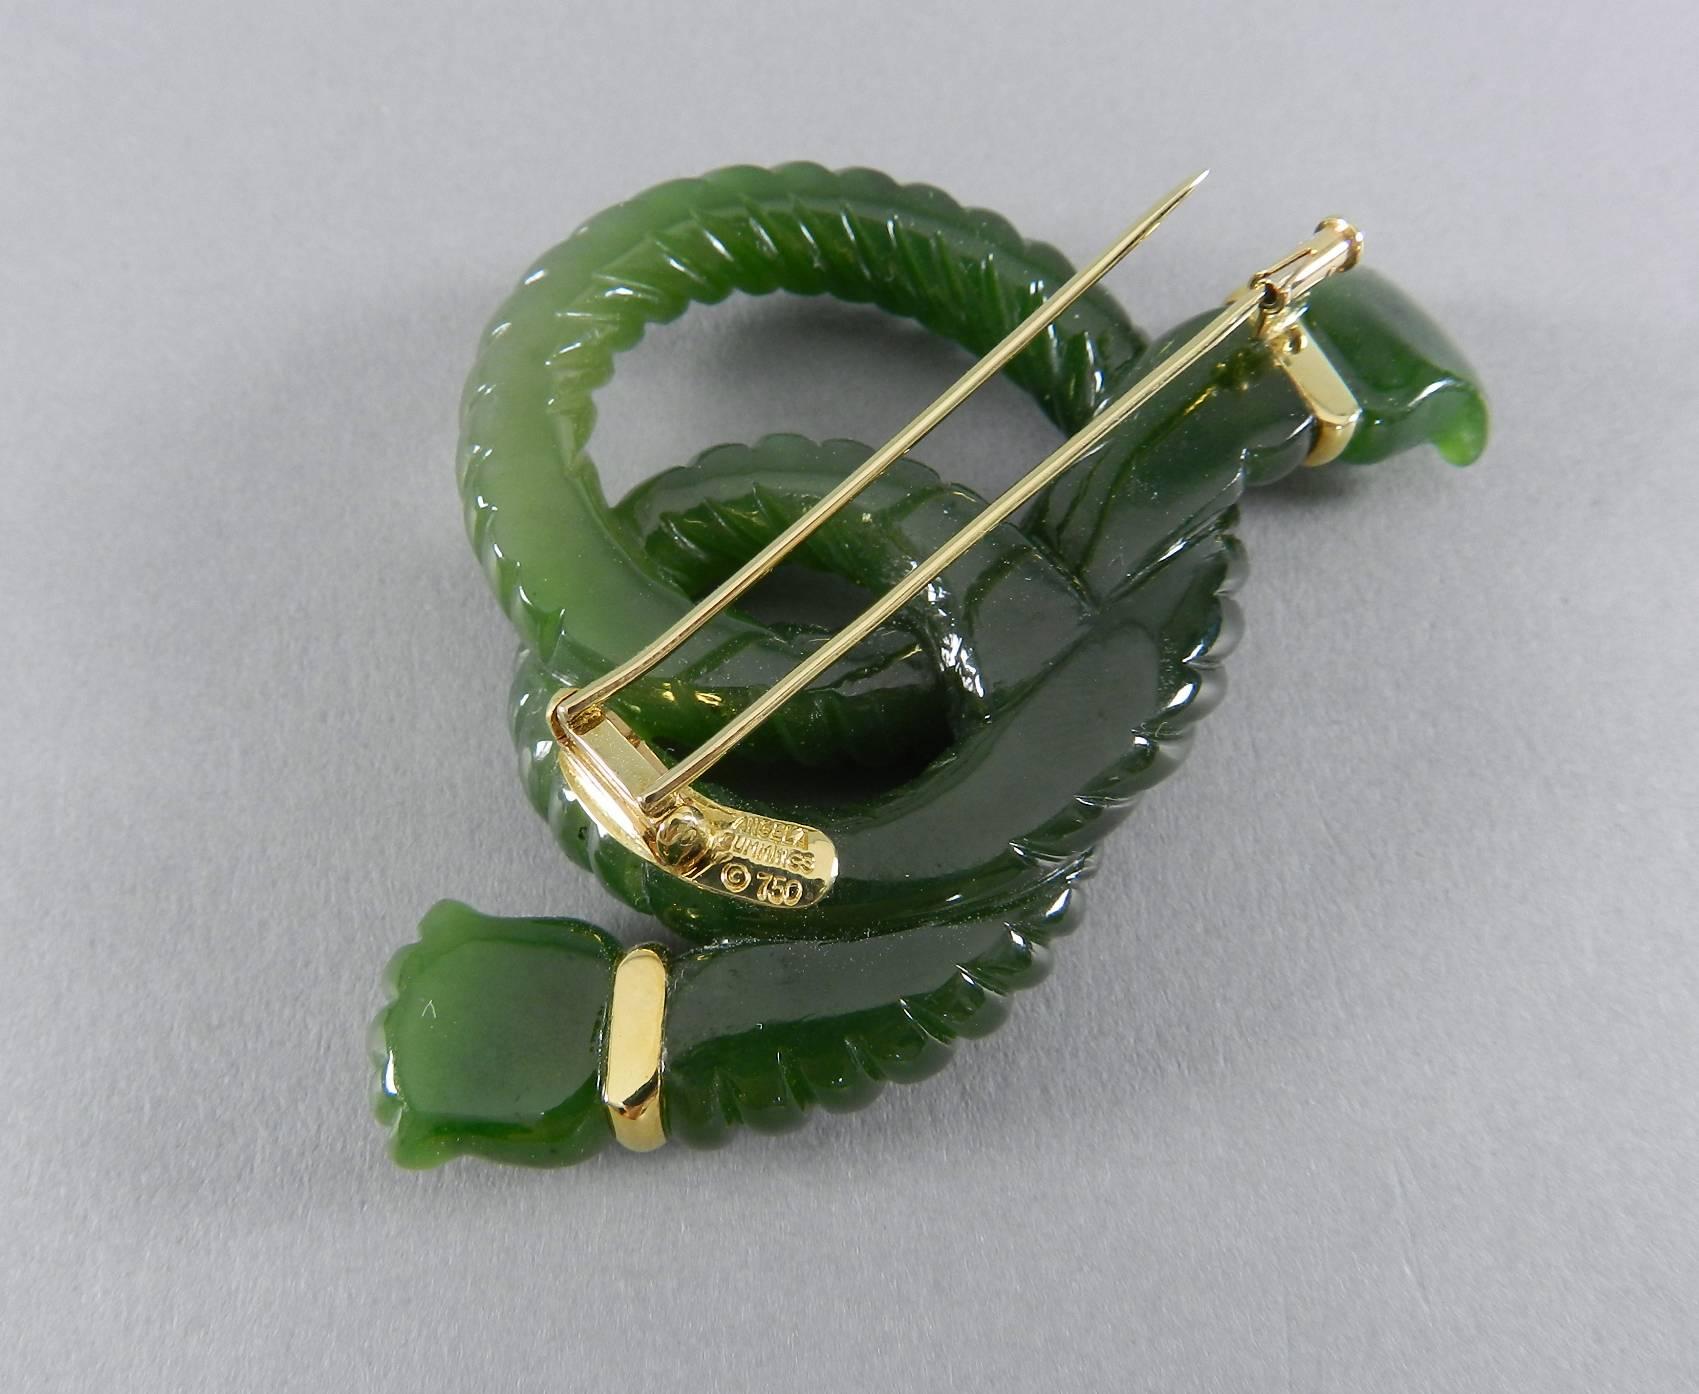 Angela Cummings green nephrite and 18k gold knot brooch.  Measures 3” x 1-7/8” .  Hallmarked “Angela Cummings © 750" on reverse and “k18” on side profile of clasp.  Double fur-clip with trombone closure. 41.2 grams.

We ship worldwide.